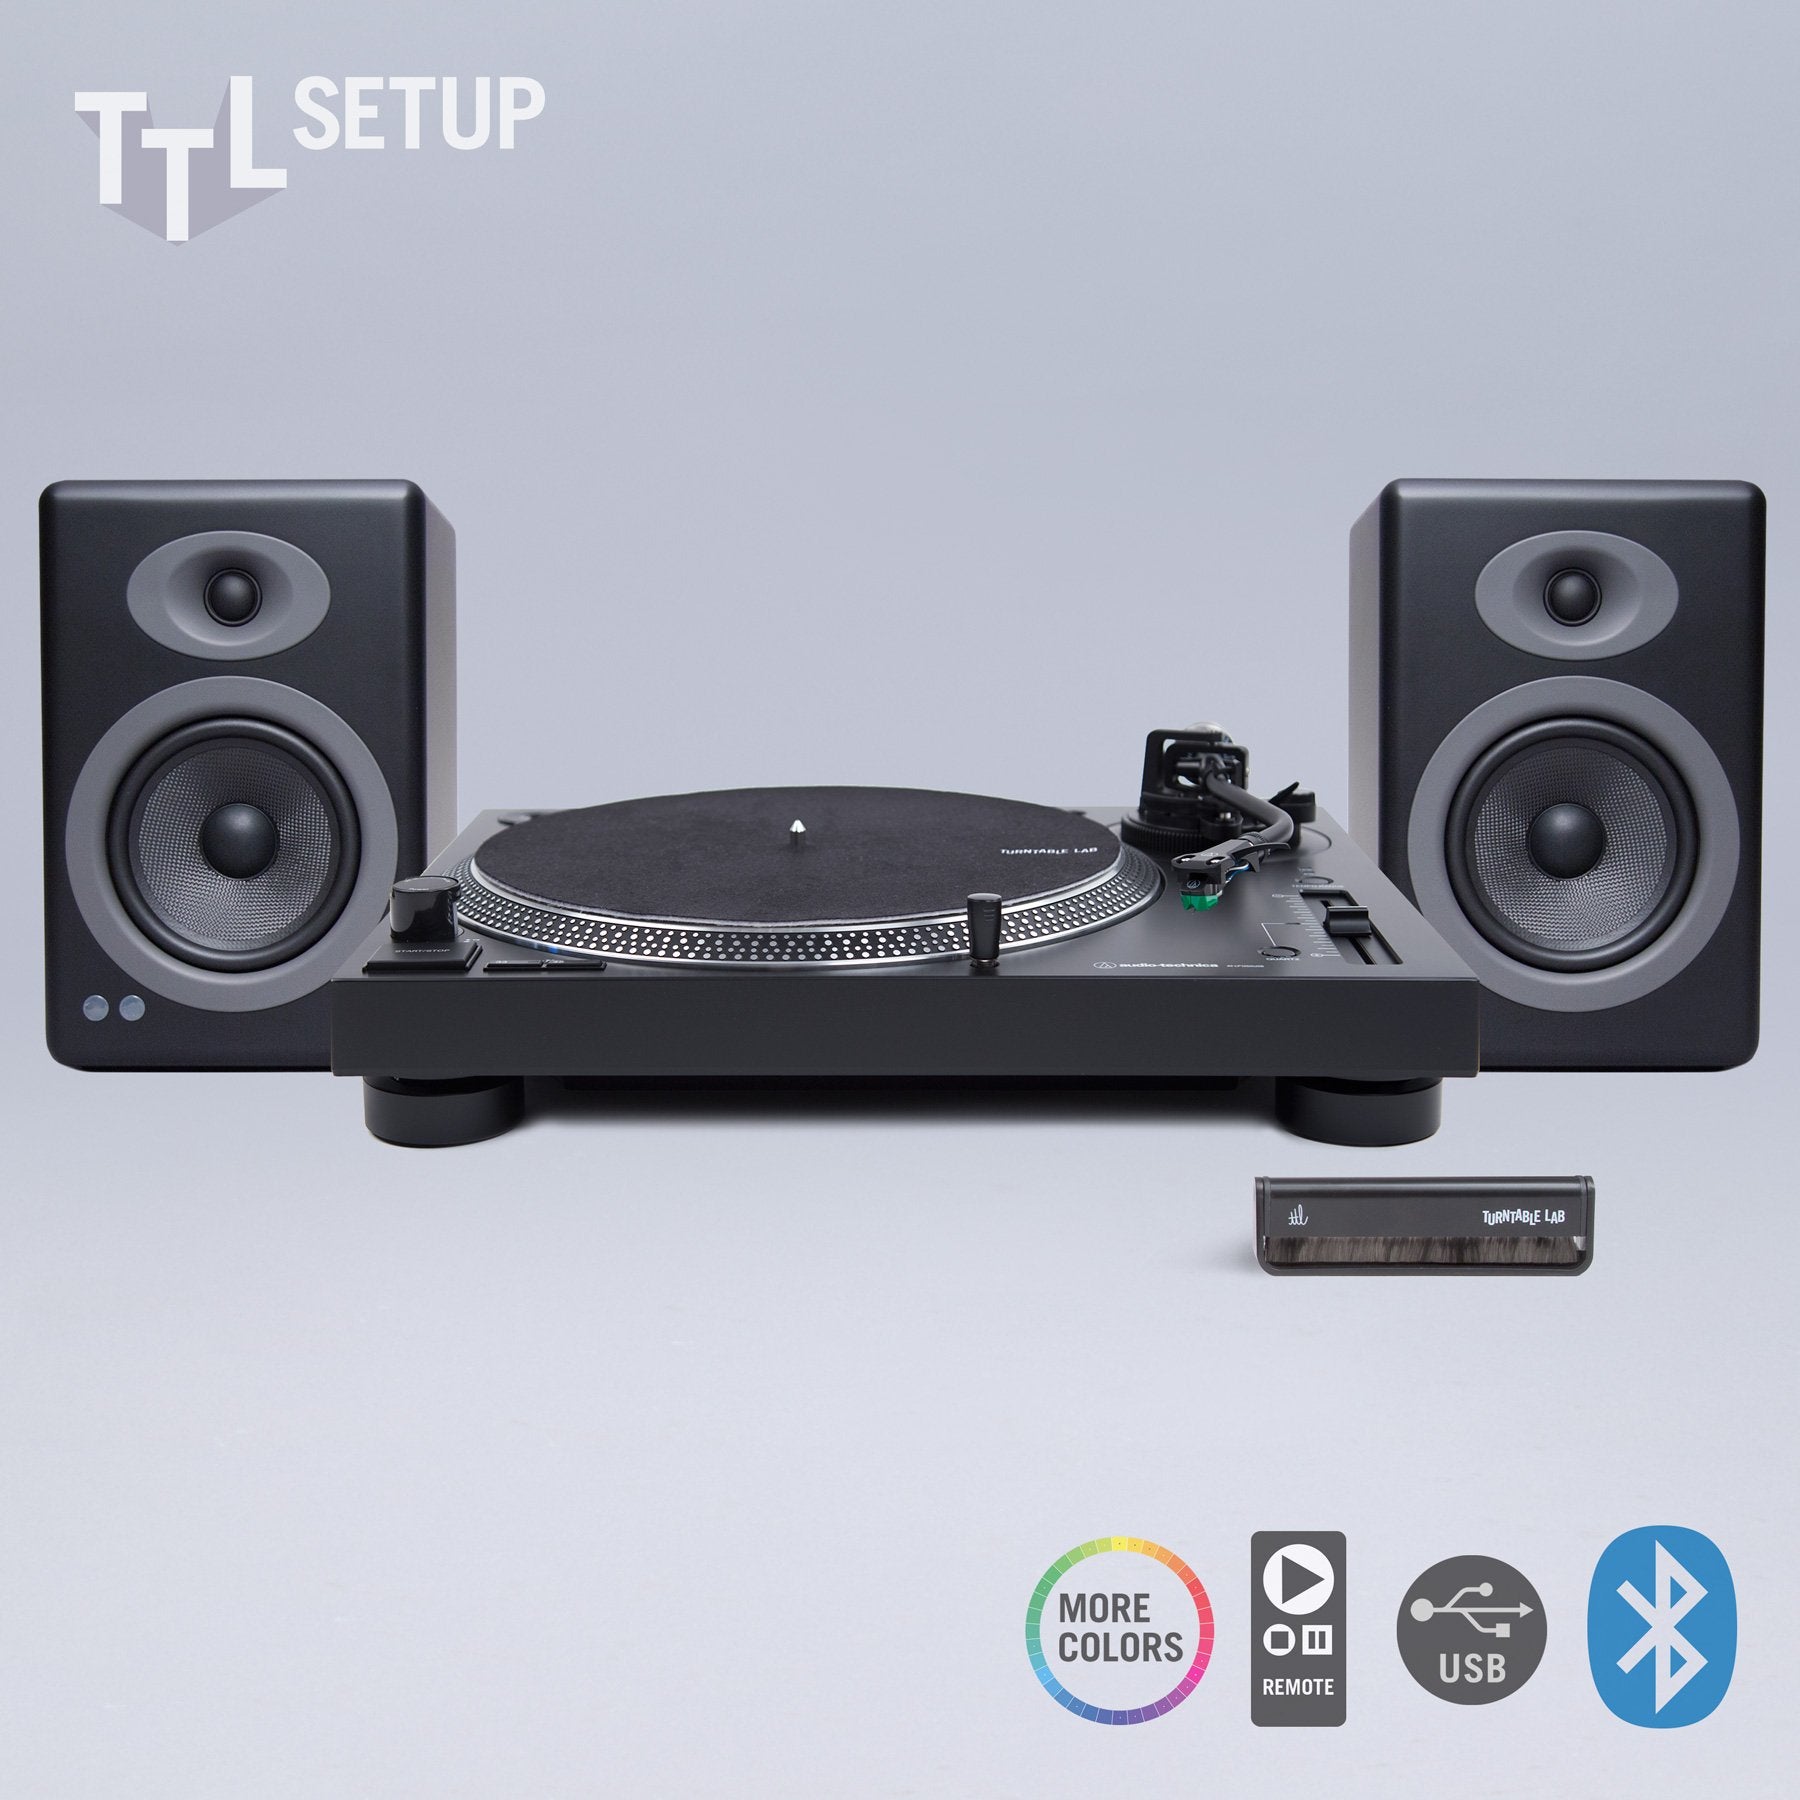 Audio-Technica: AT-LP120X / Audioengine A5+ Wireless / Turntable Package (TTL Setup)